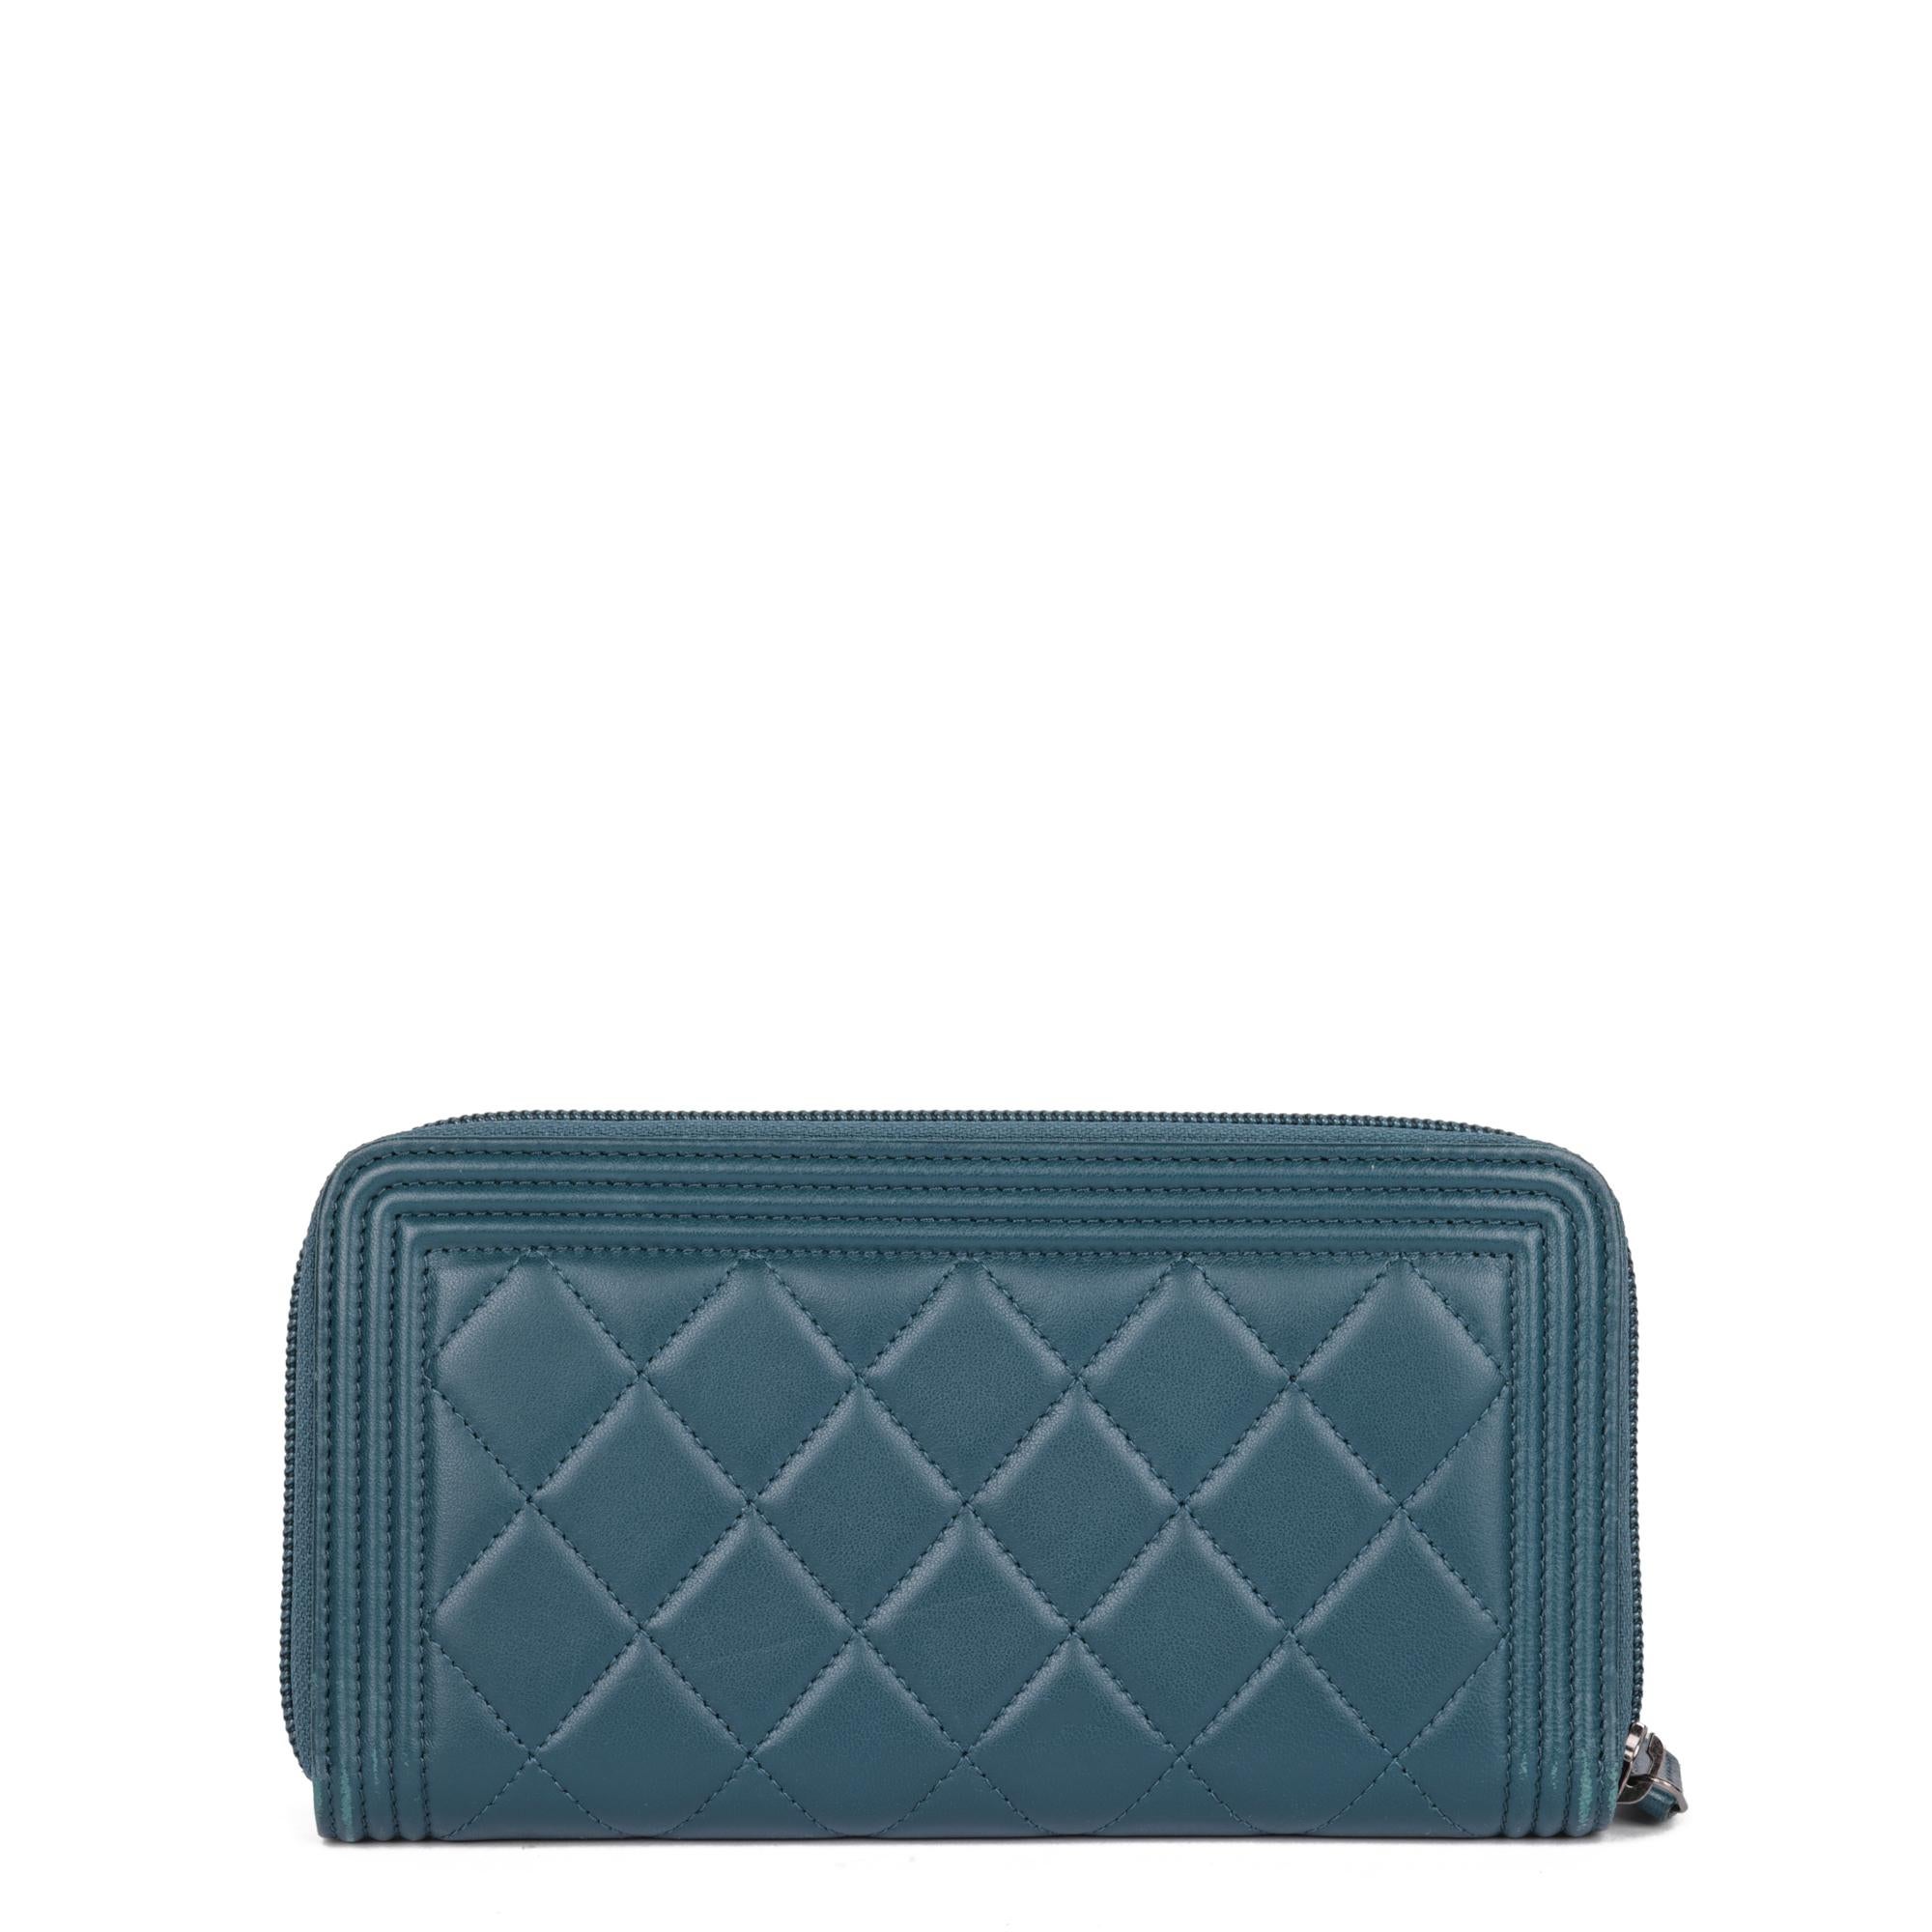 Chanel Teal Lambskin Leather Boy Matrasse Long Wallet

CONDITION NOTES
The exterior is in very good condition with minimal signs of use.
The interior is in exceptional condition with minimal signs of use.
The hardware is in very good condition with